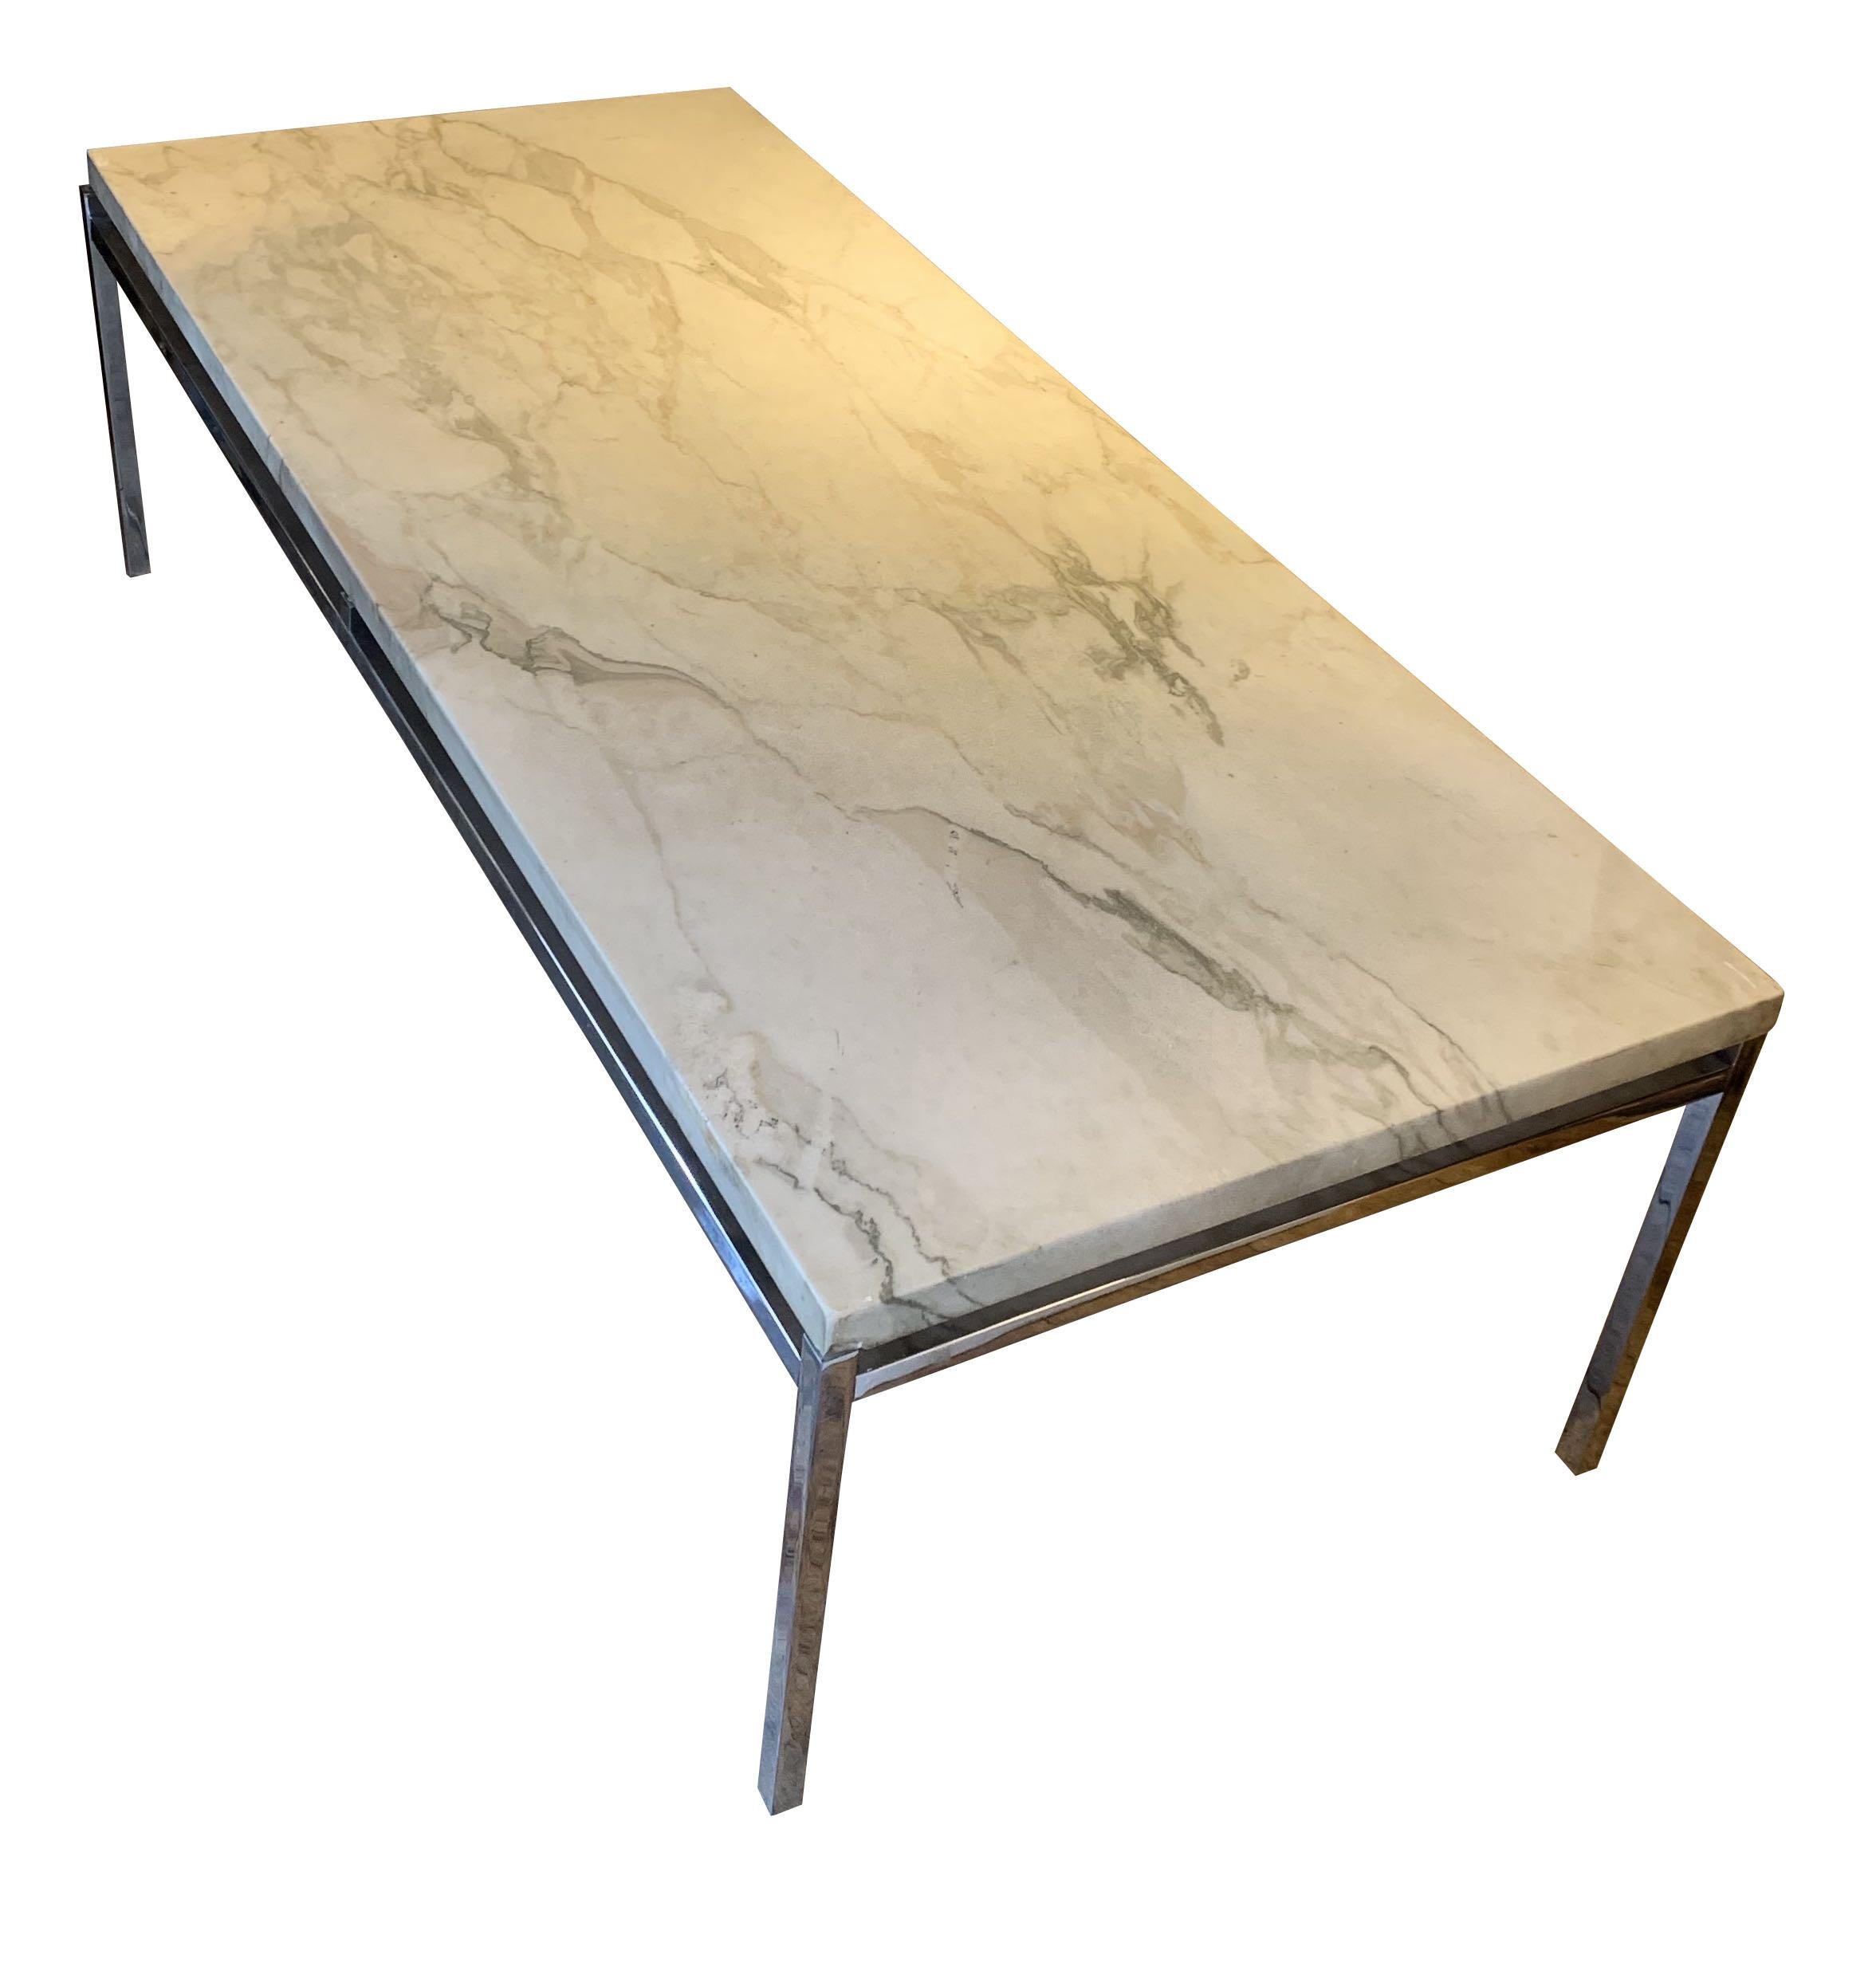 Midcentury French honed white marble-top coffee table. Beautiful grey veins run through the table top.
Simple design nickel base.
 